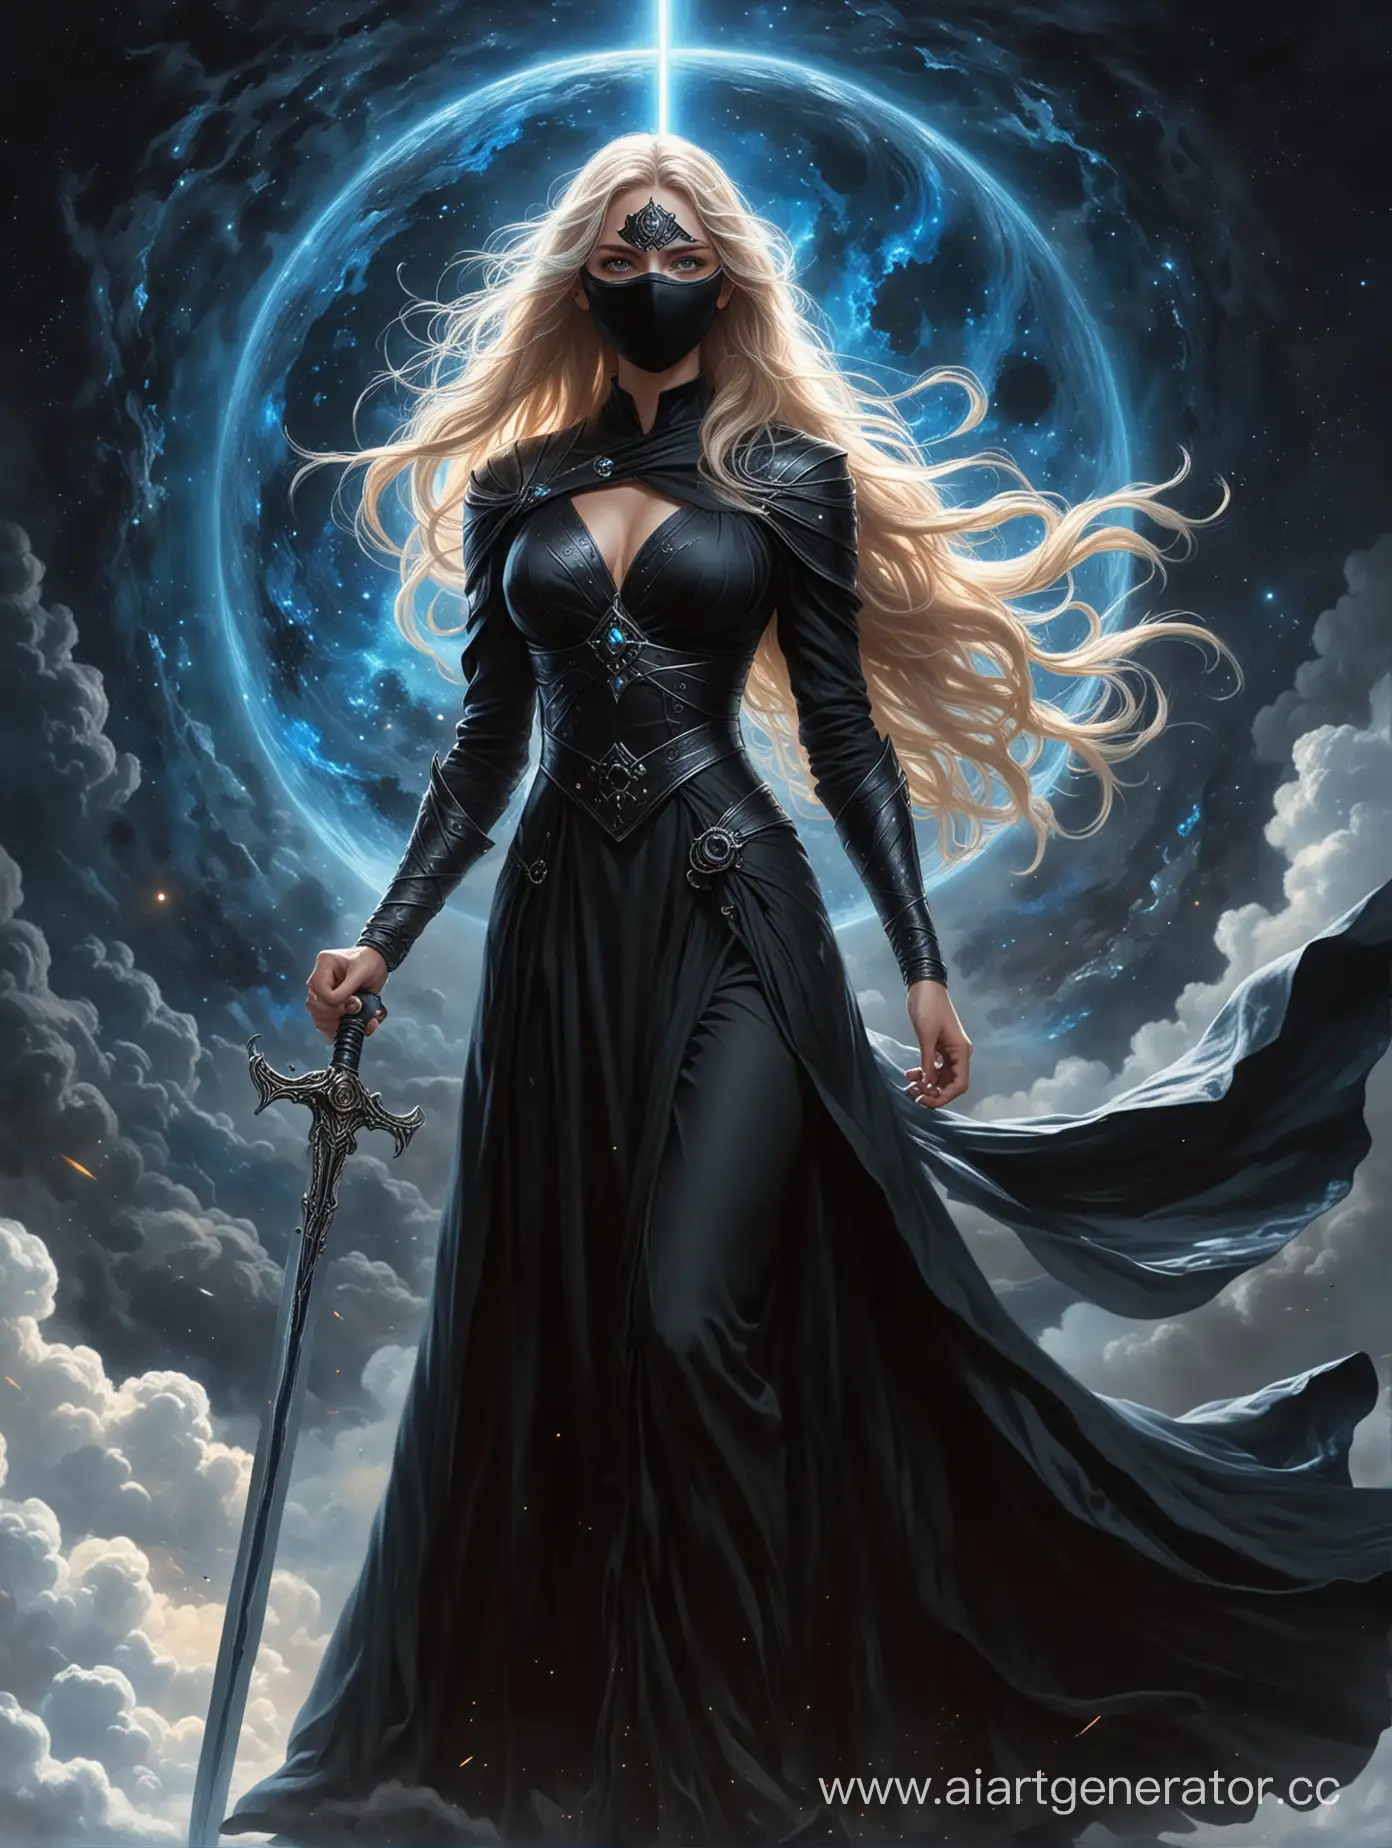 Mystical-Priestess-Warrior-with-Iron-Sword-in-Ethereal-Space